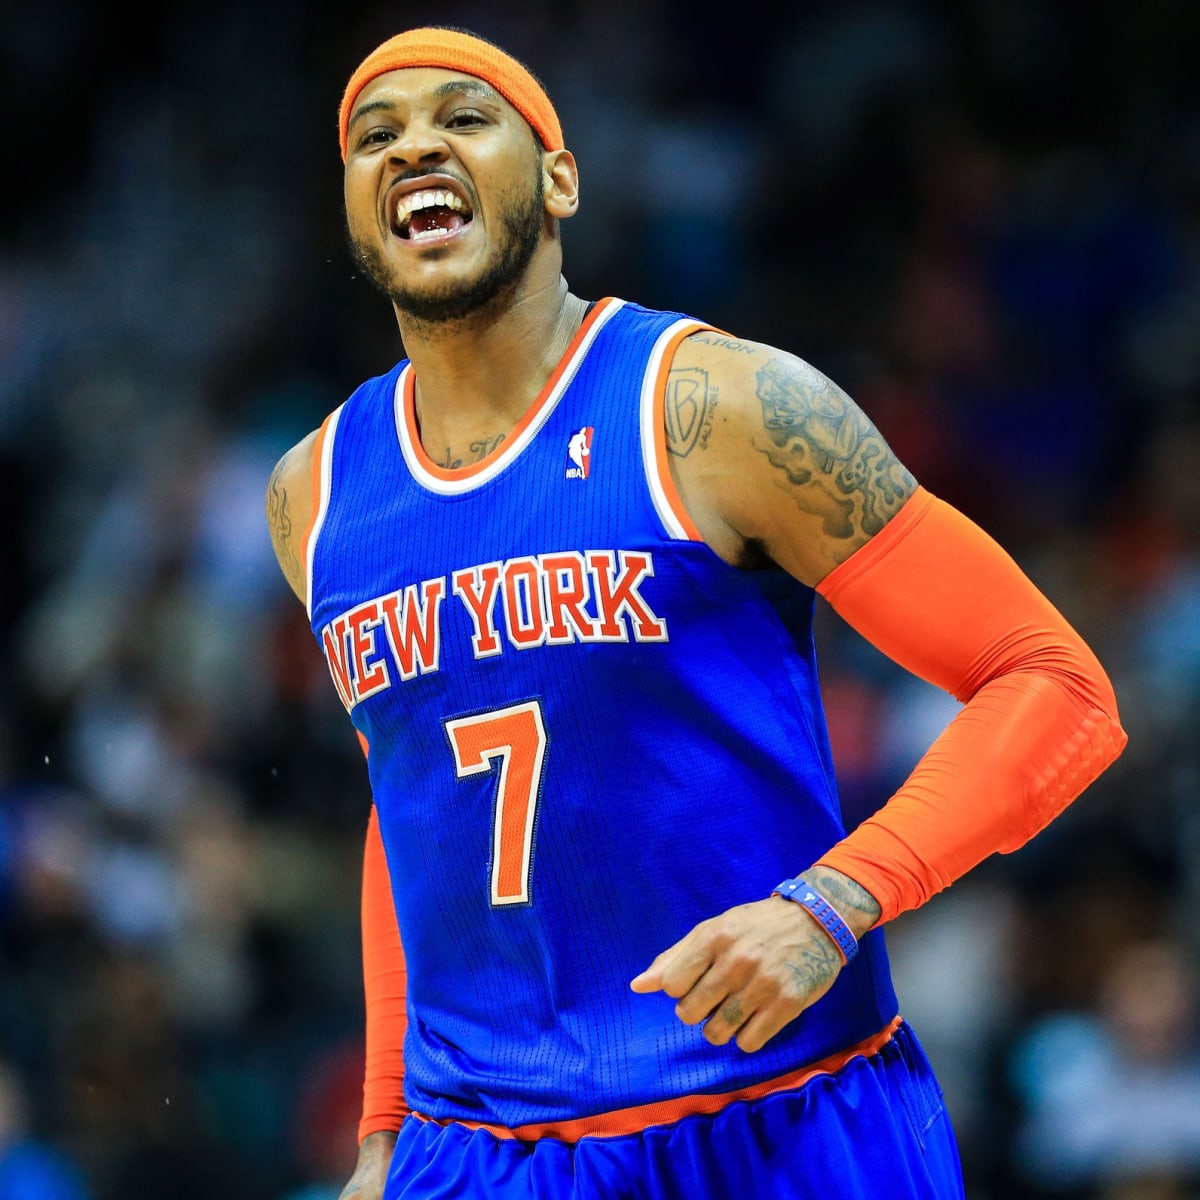 New York Knicks: Anthony Davis is not a repeat of Carmelo Anthony